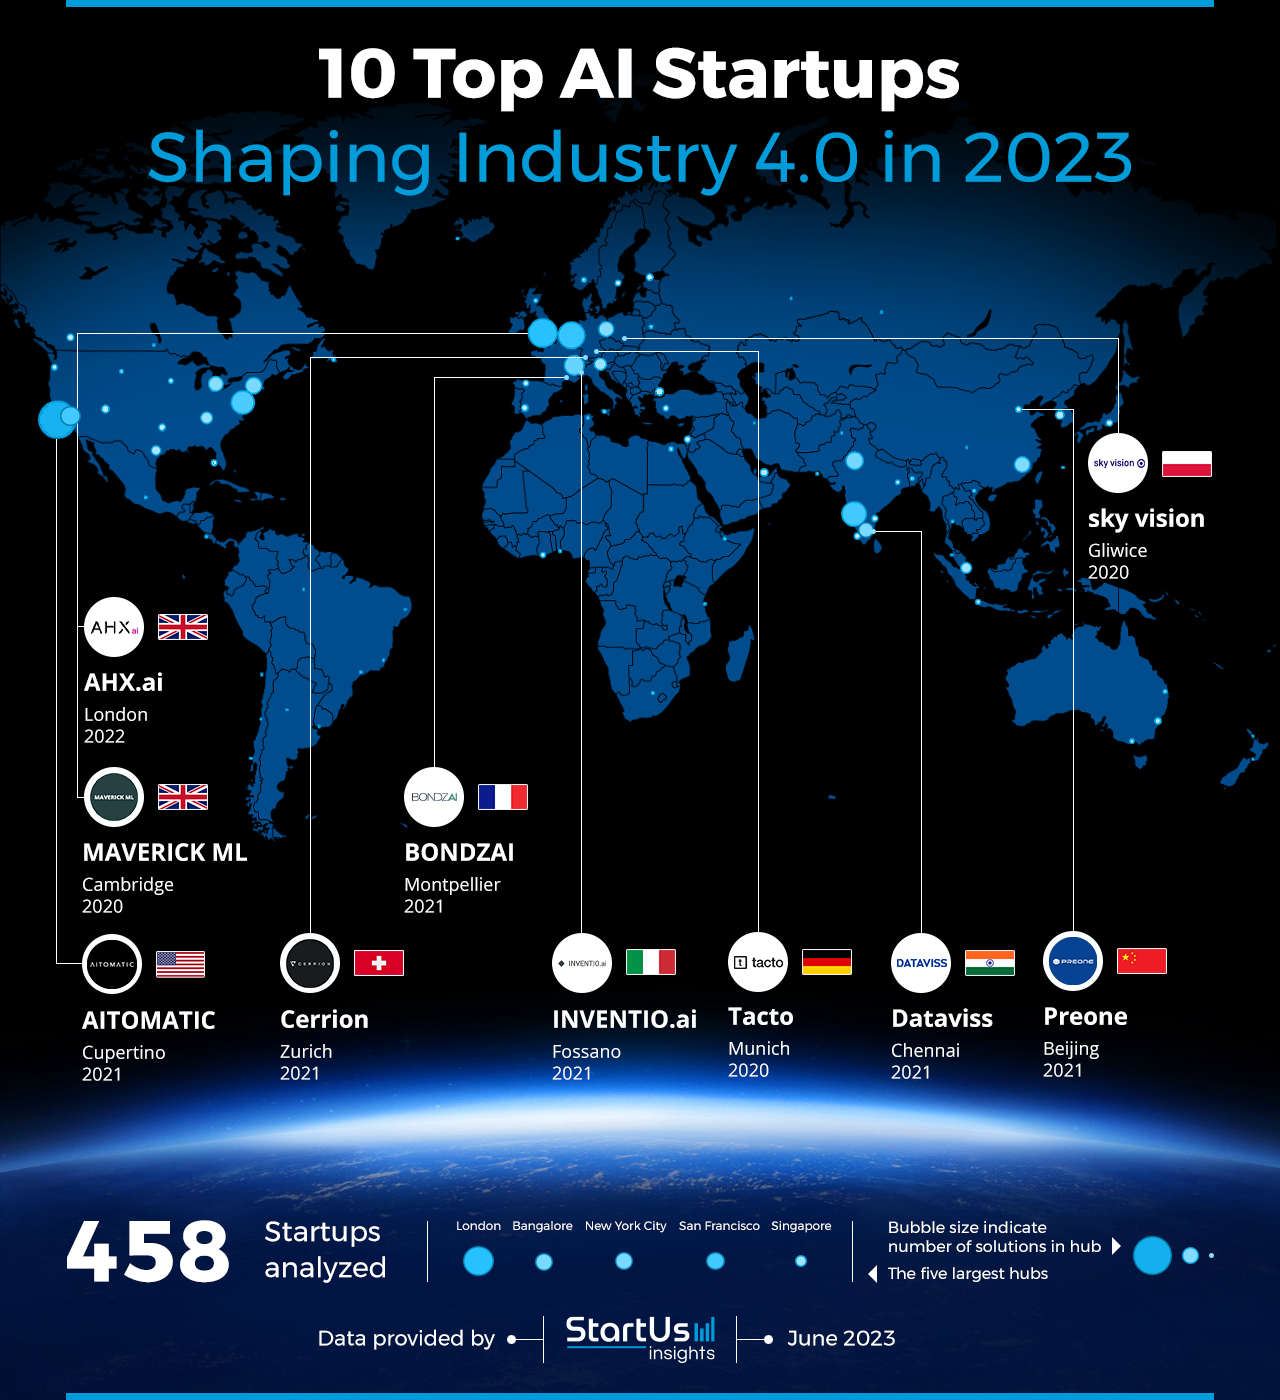 AI-Startups-shaping-Industry-4.0-Startups-to-Watch-Heat-Map-StartUs-Insights-noresize